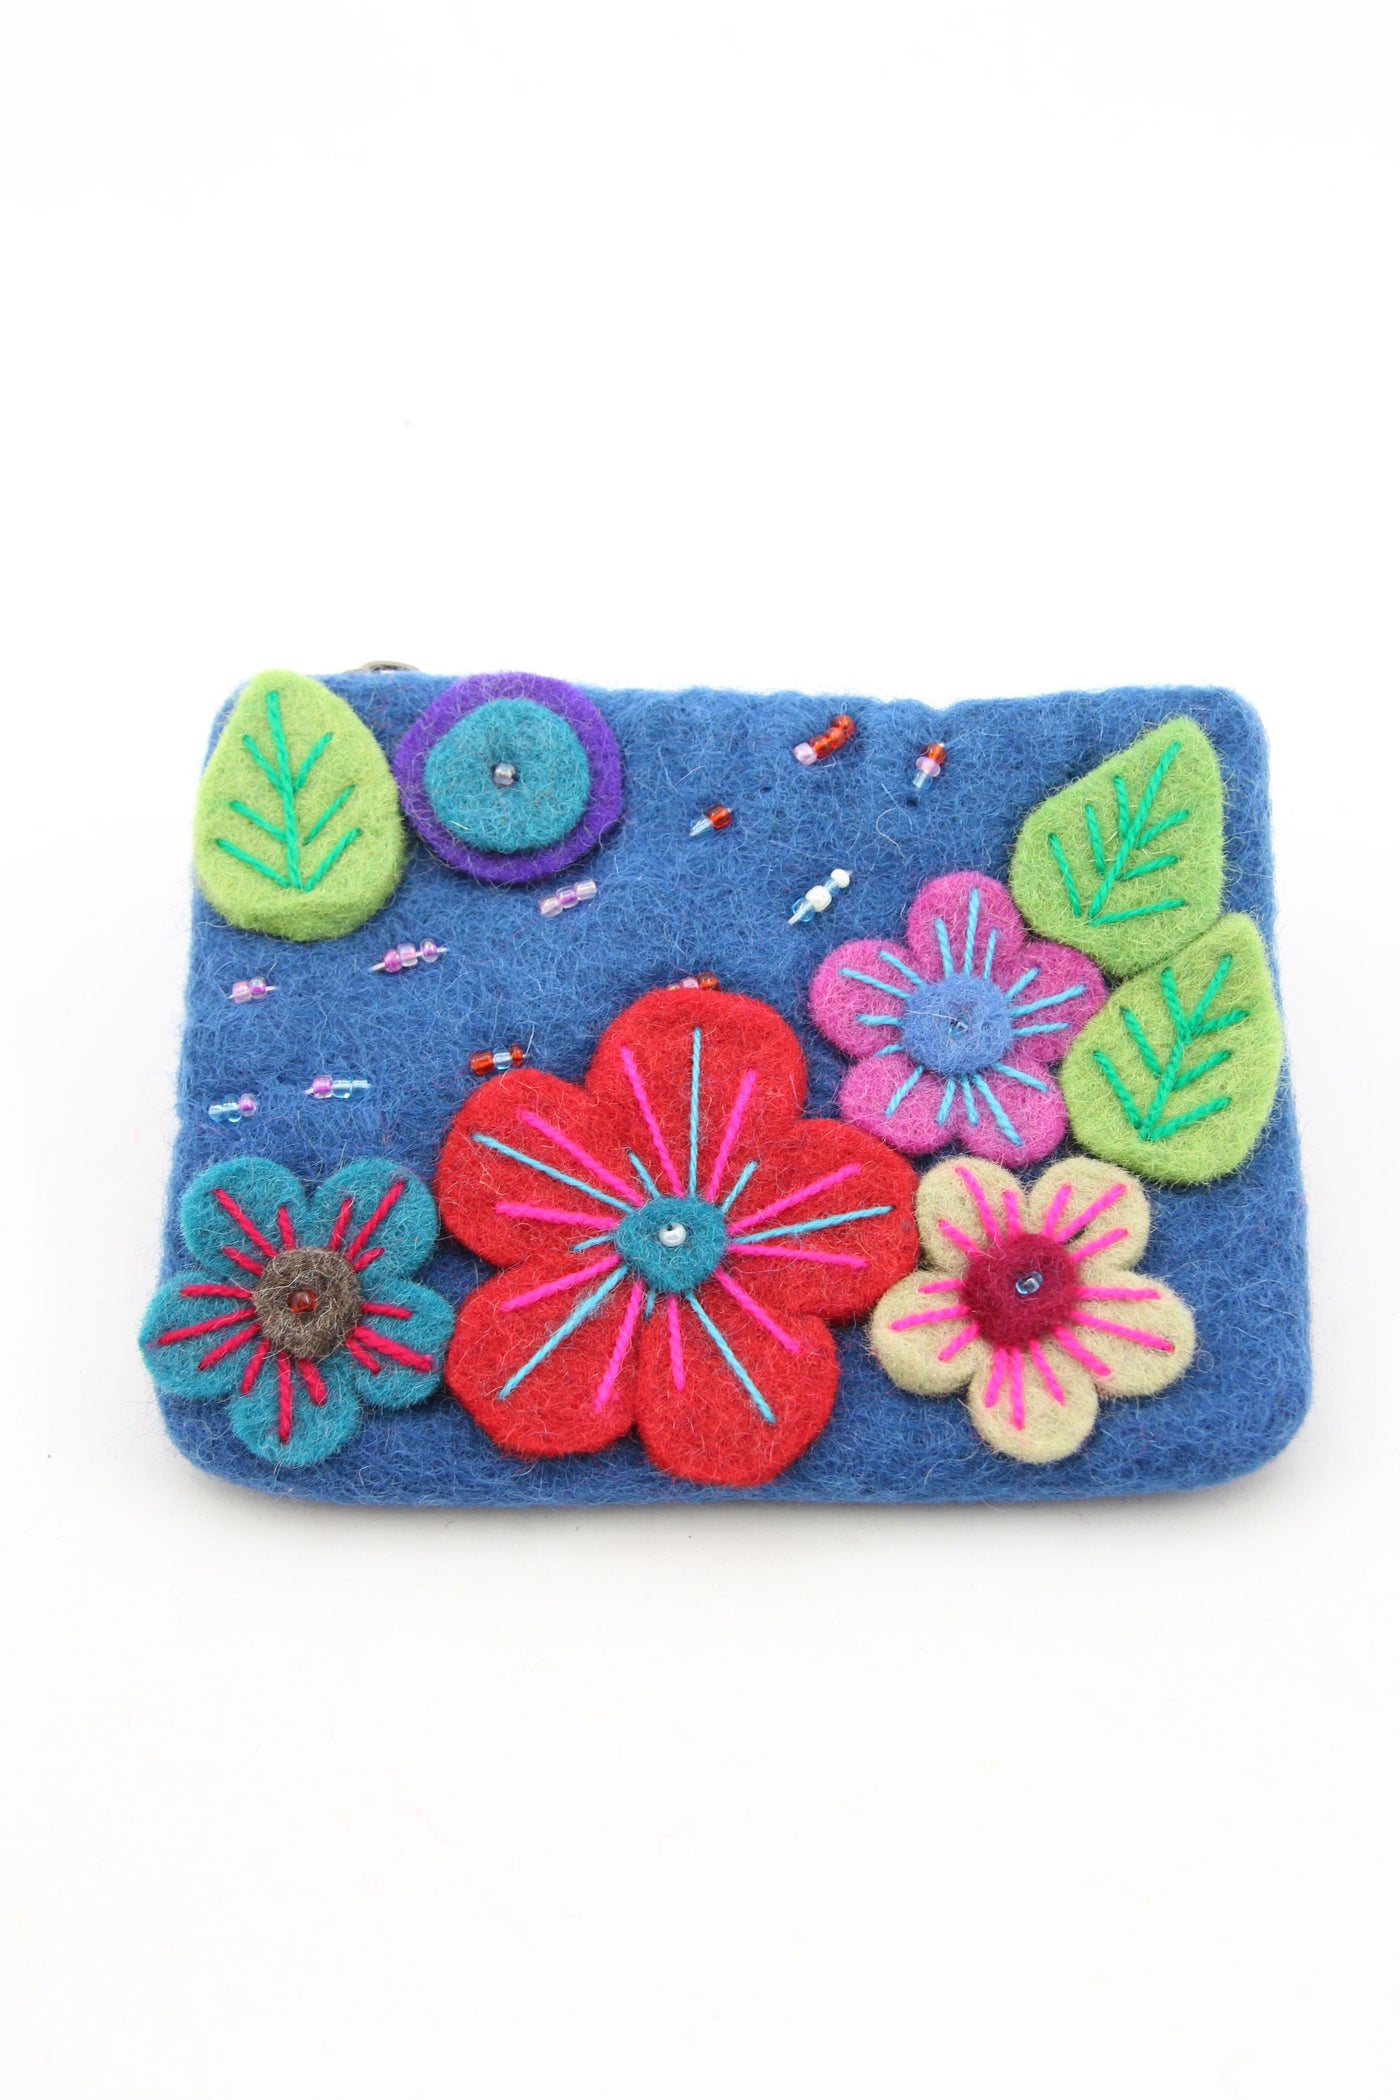 Turquoise Floral Felted Wool Pouch, Coin Purse w/ Zipper, Fair Trade from Nepal